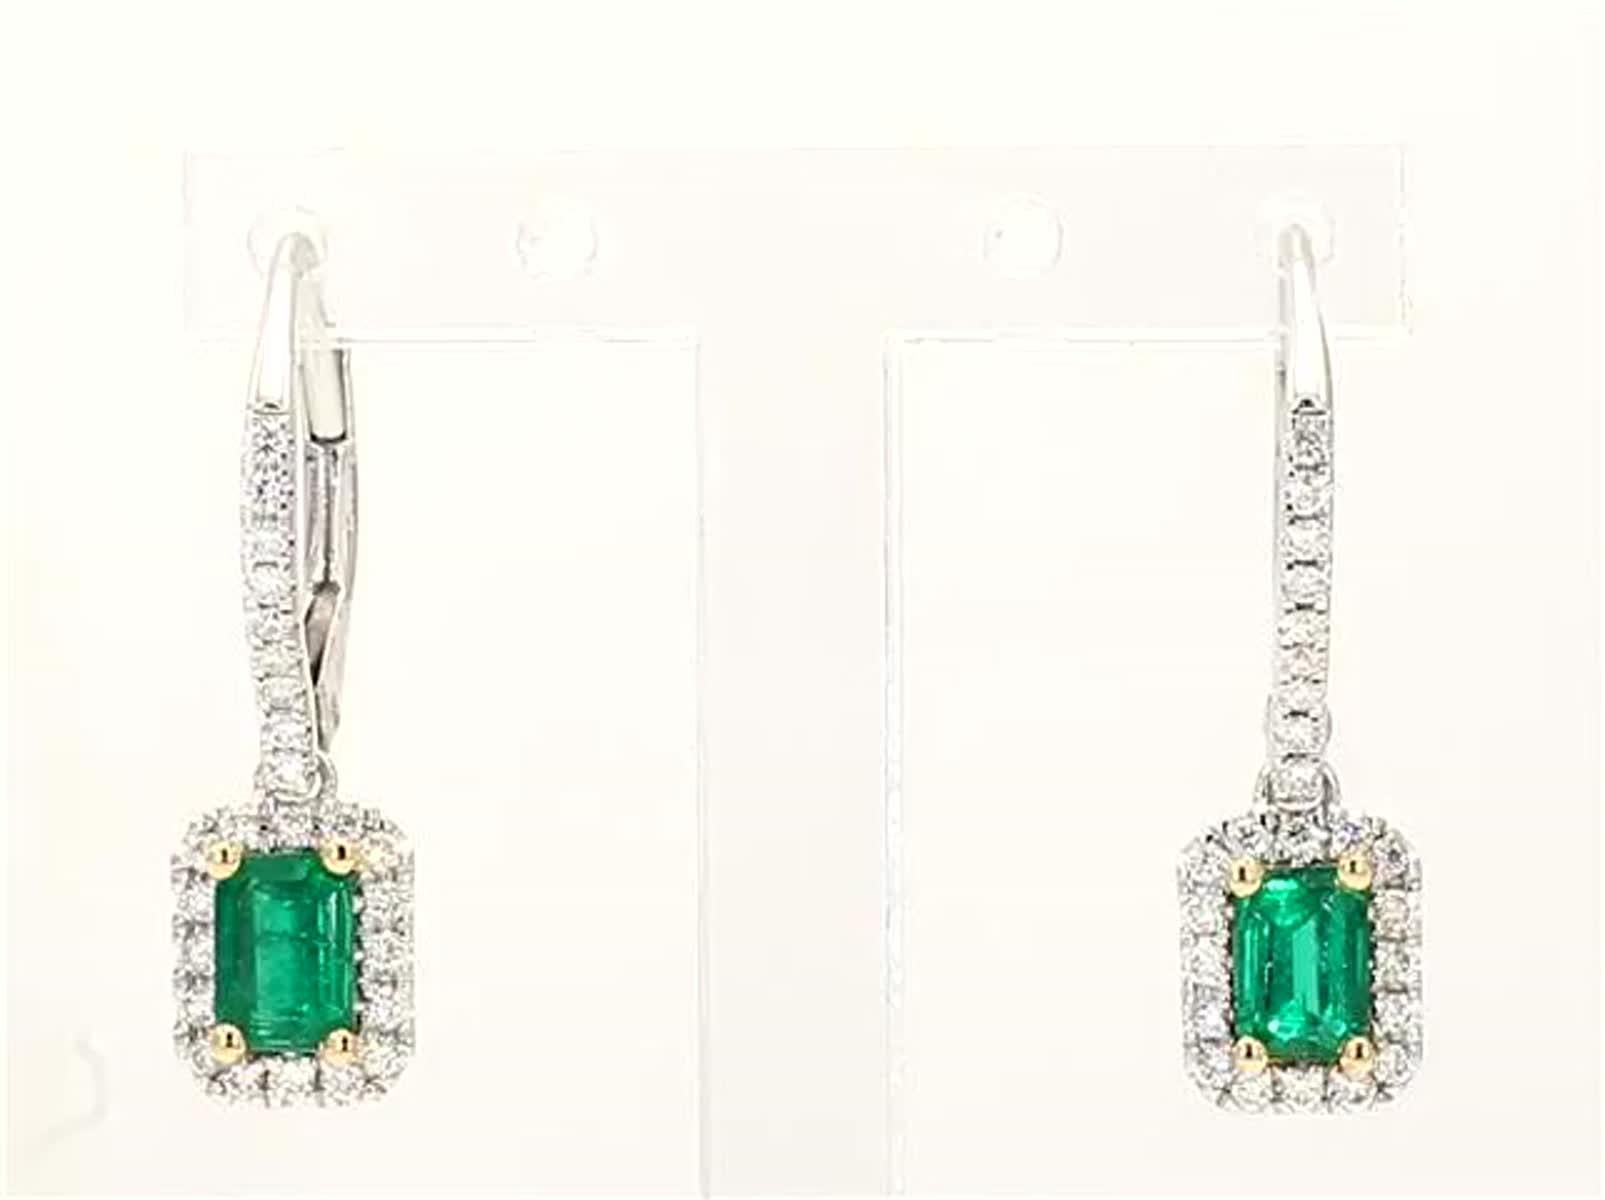 Emerald cut emeralds surrounded by round white diamonds in a beautiful single halo as well as along the earring. These earrings are designed to be in a simple setting. Can be used as a drop earring or in addition to your collection of jewels.

Total